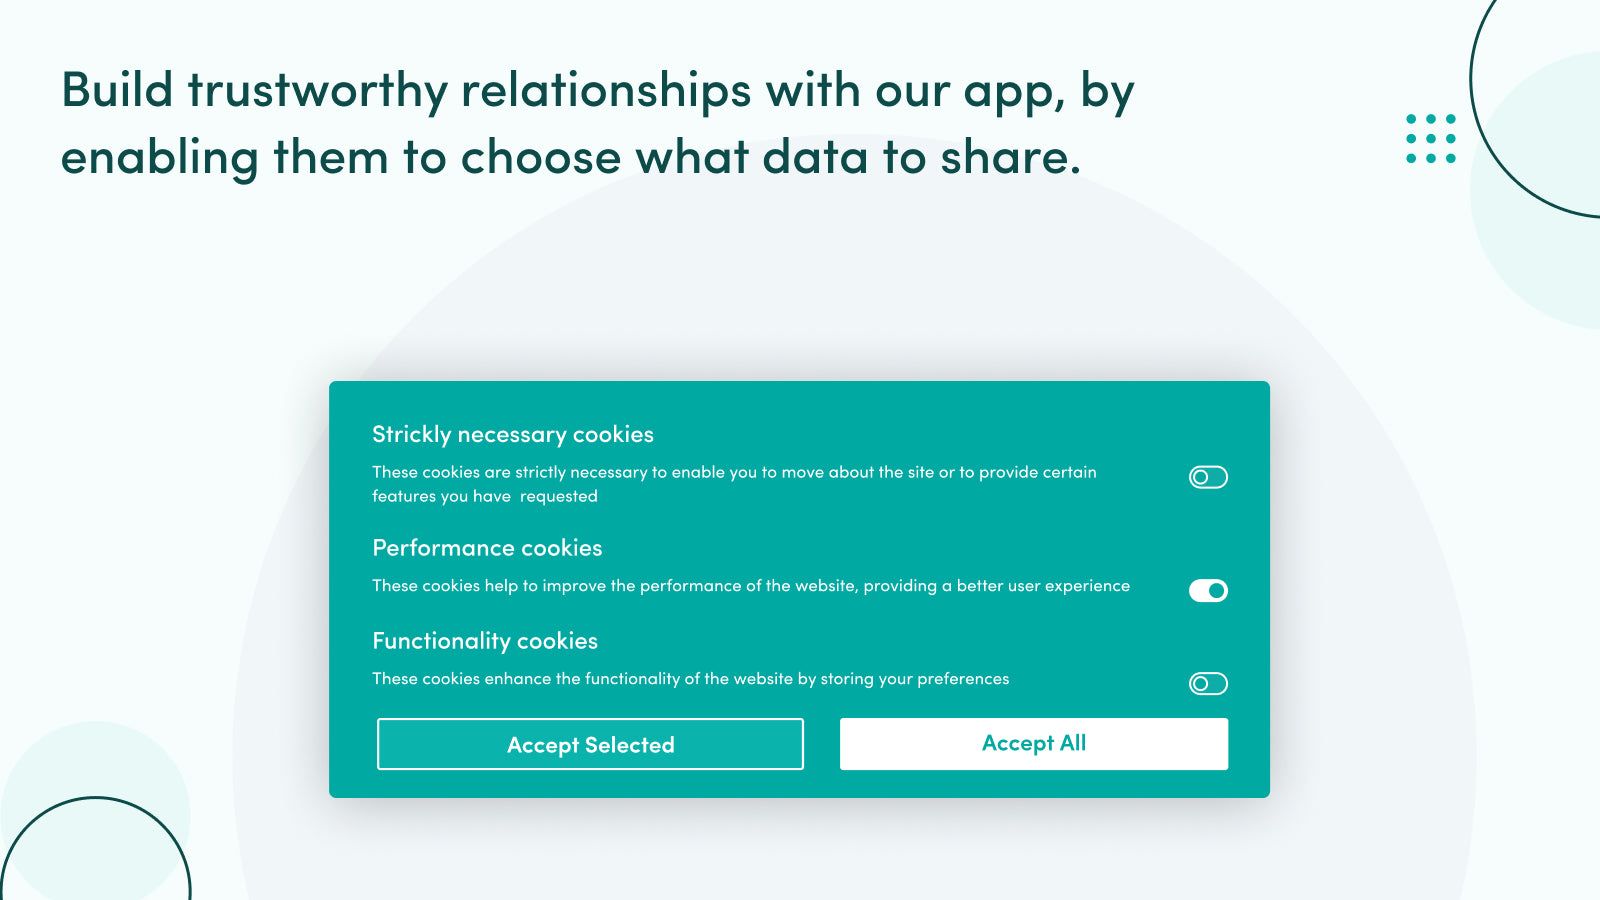 Enable your users to choose what data they can collect.